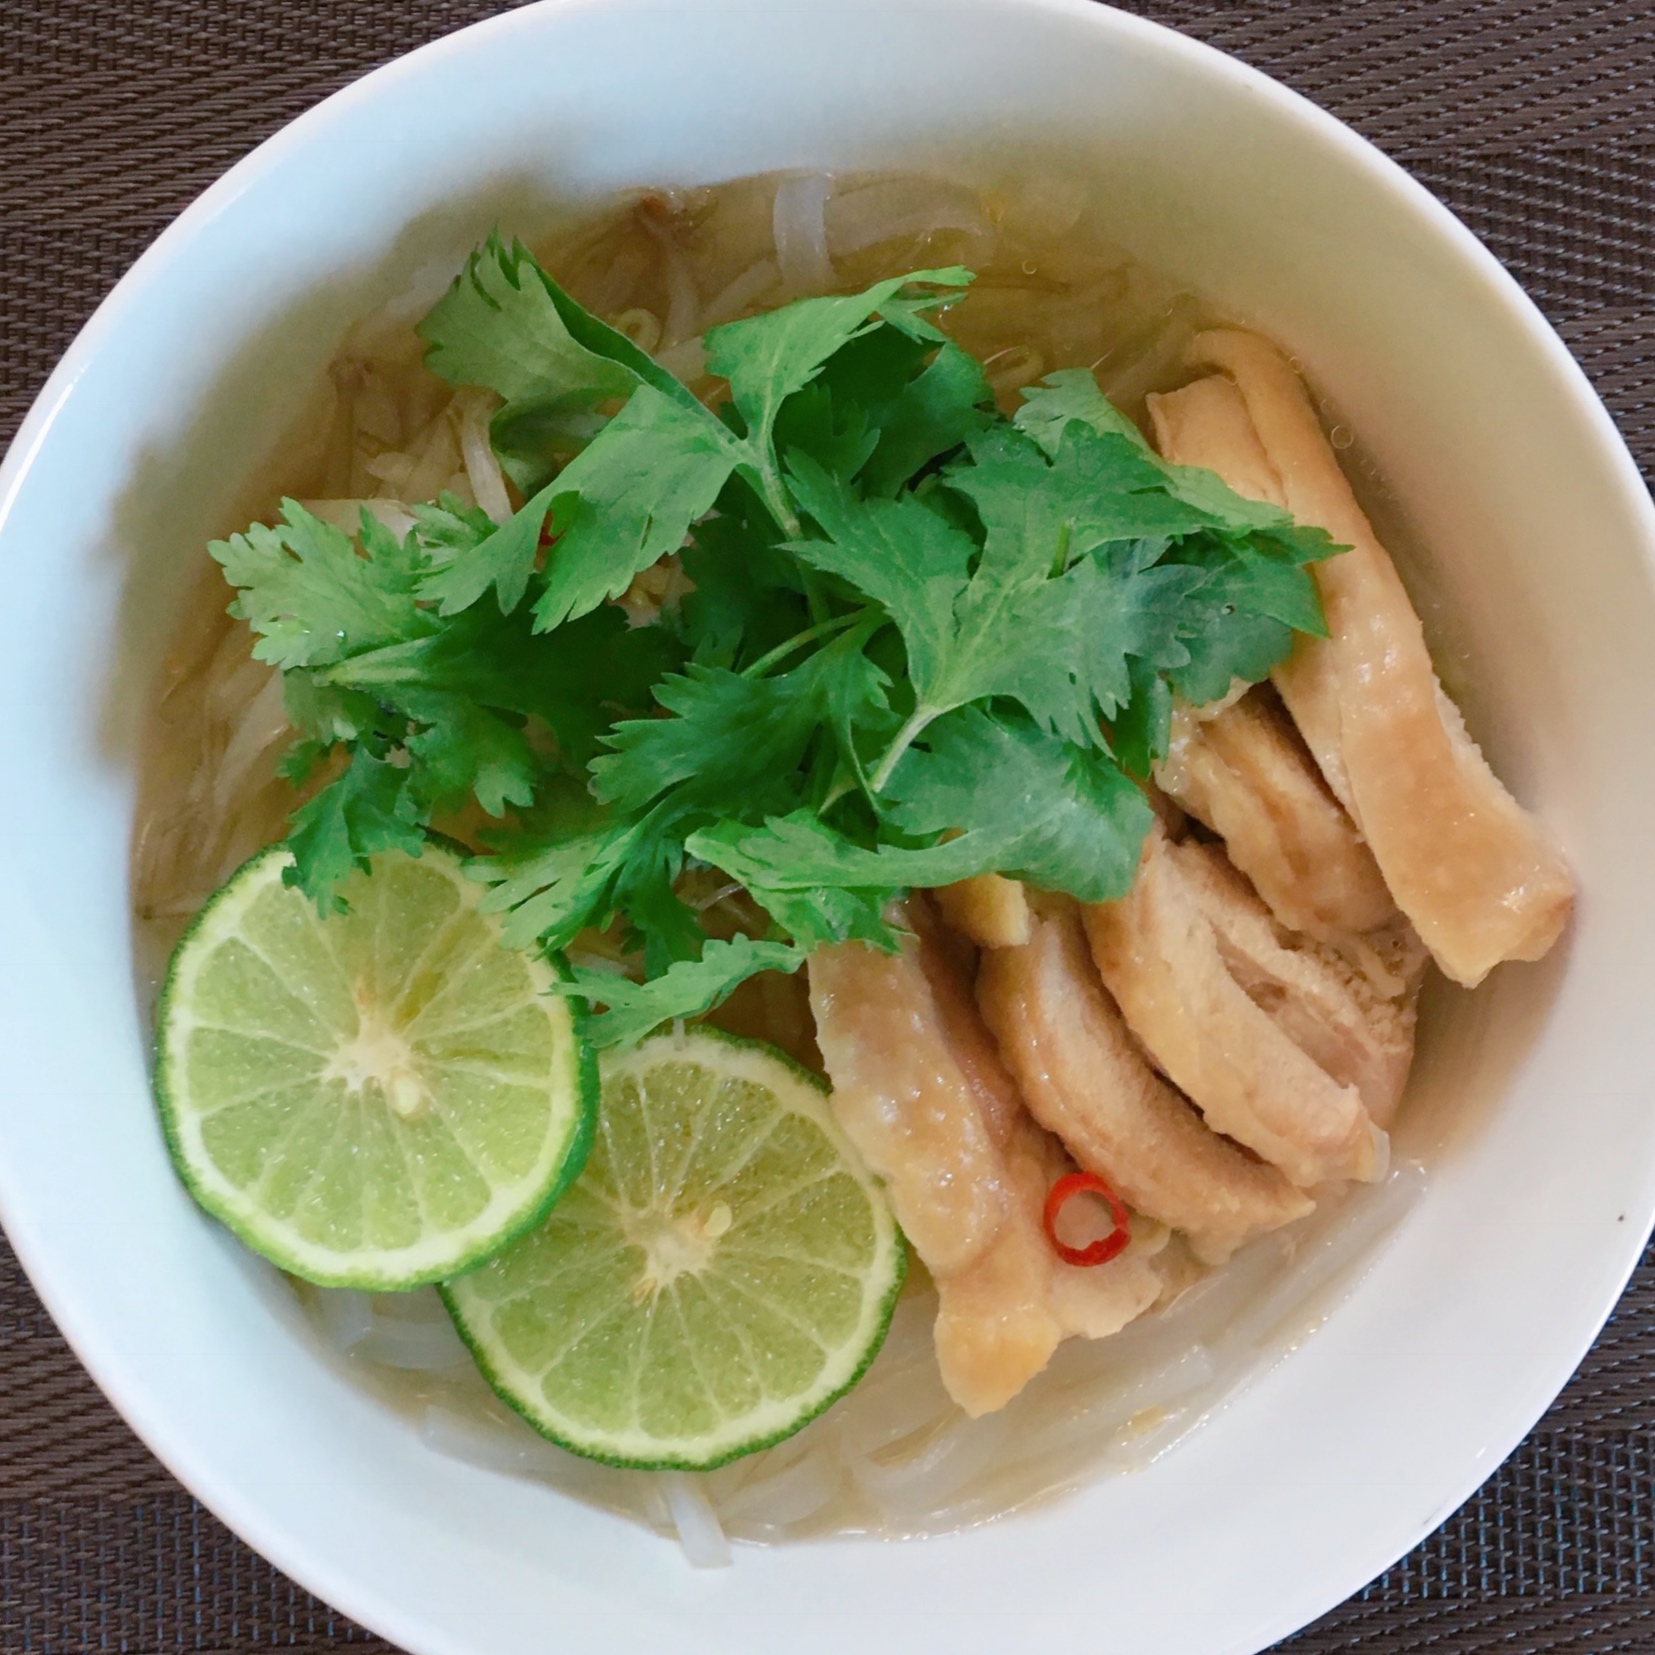 Noodles called pho are topped with soup seasoned with fish sauce, chicken, and coriander.